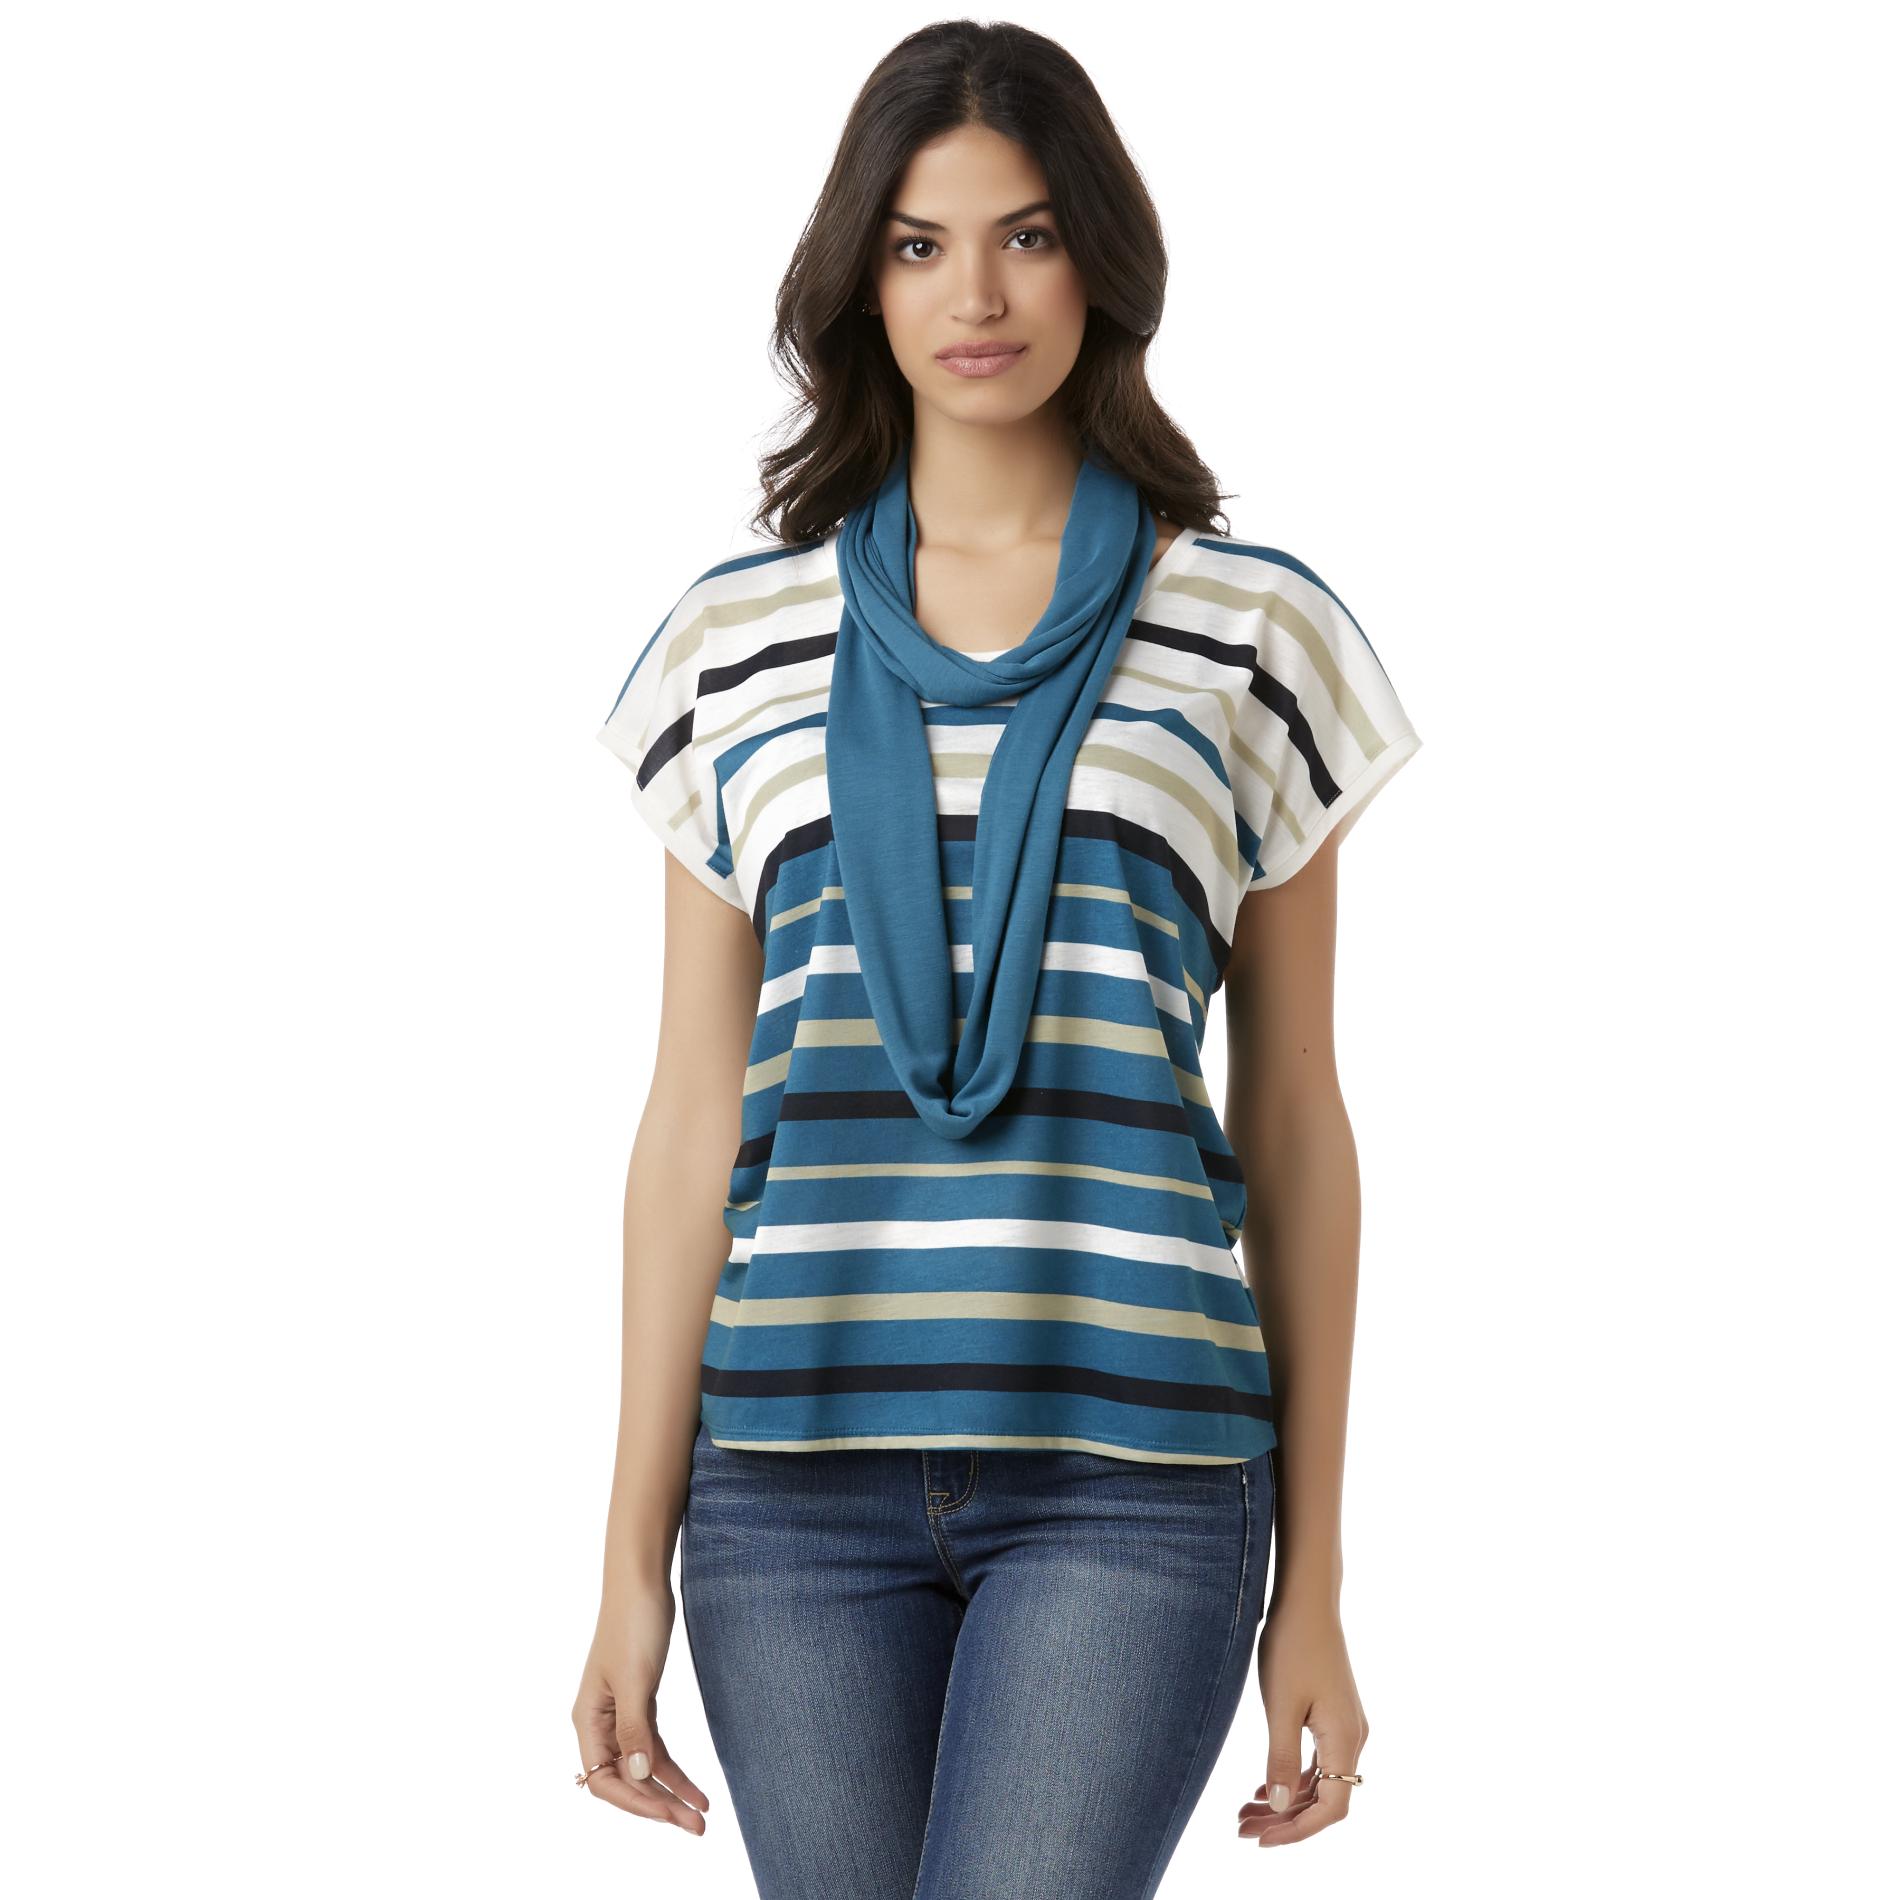 Canyon River Blues Women's Sleeveless Top & Loop Scarf - Striped